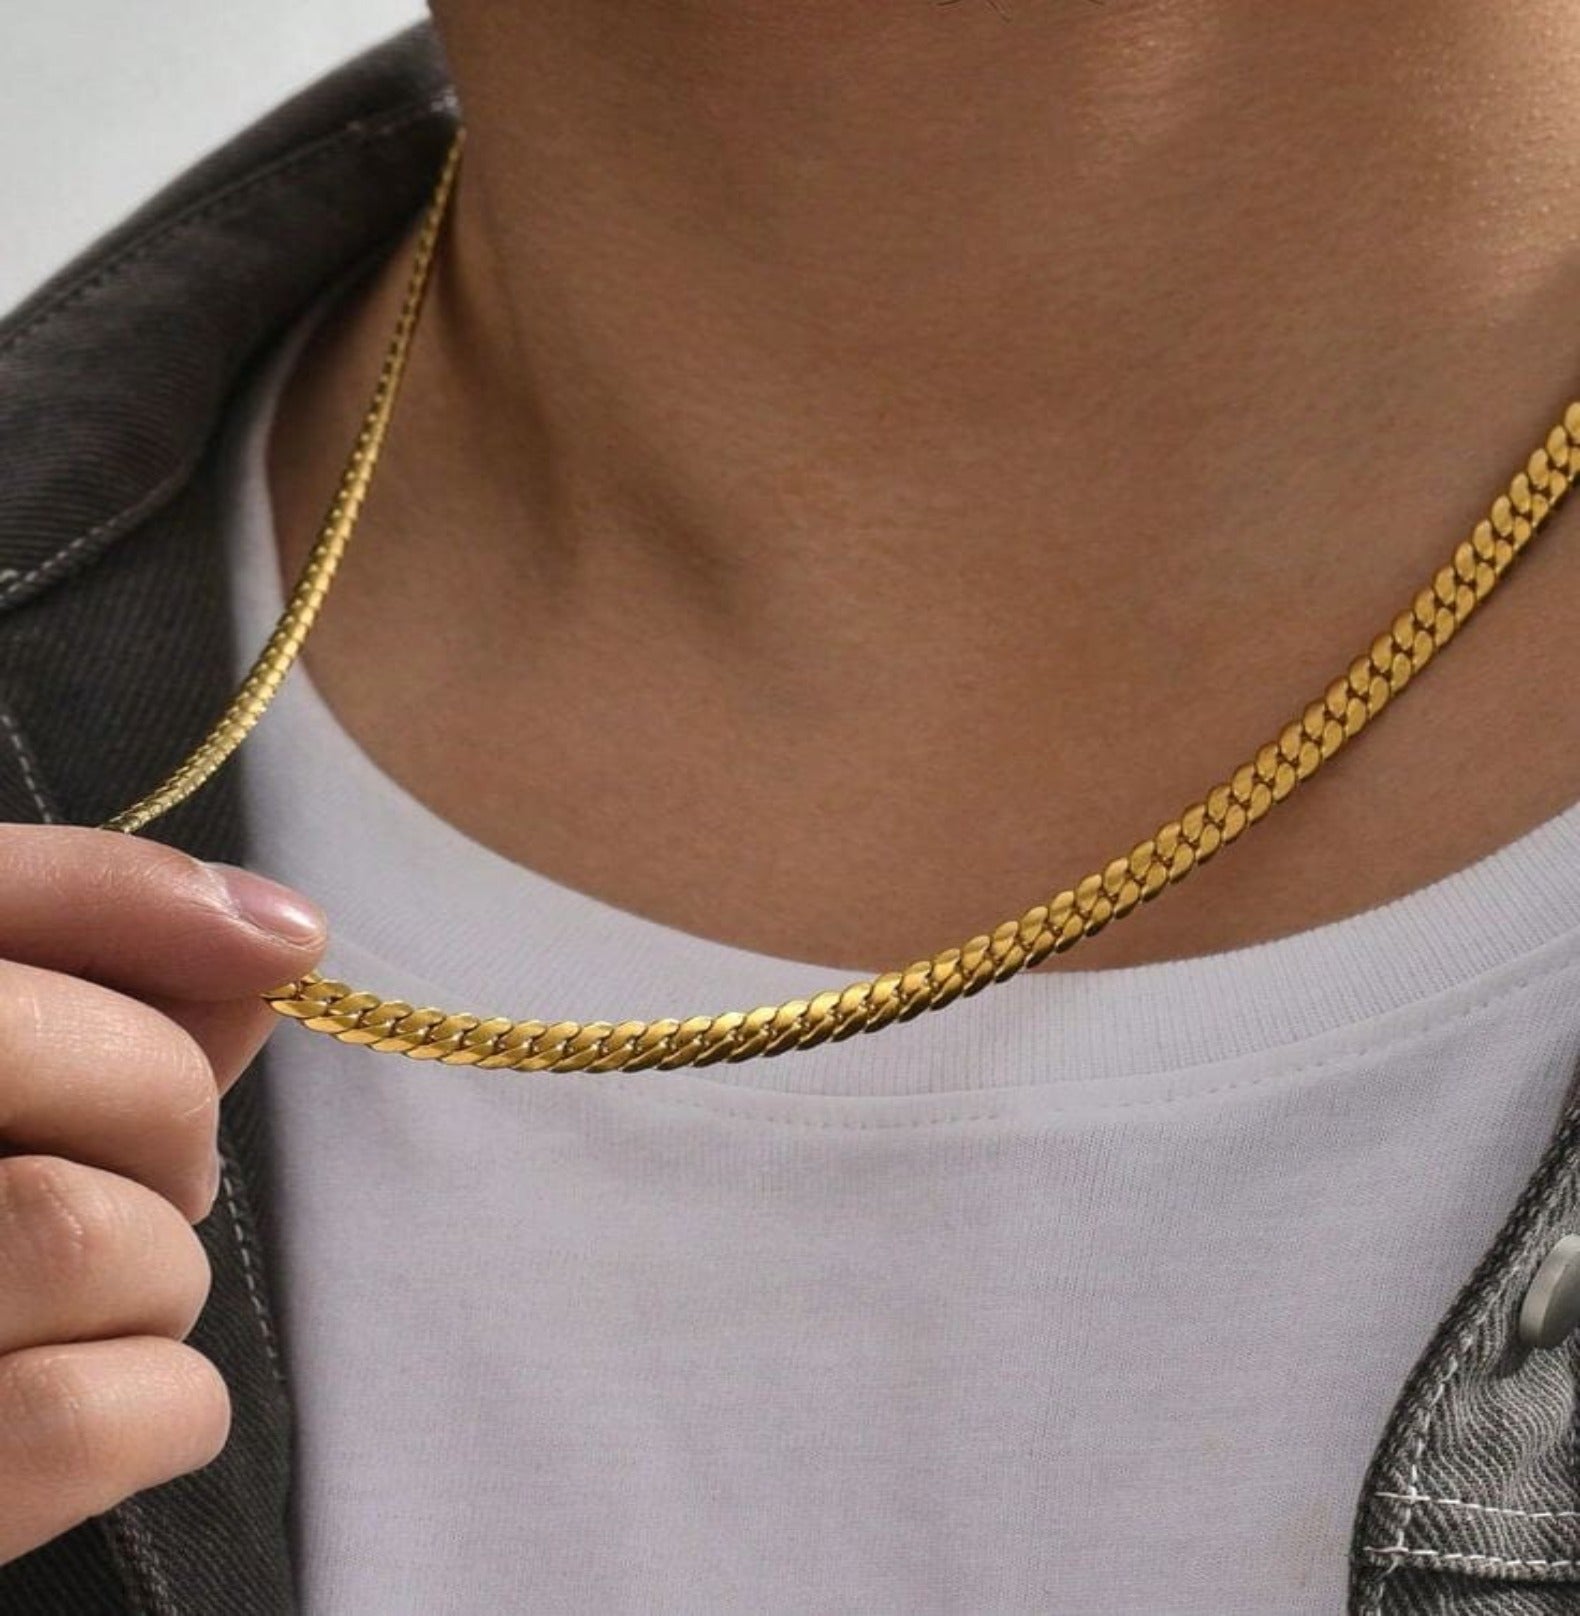 MALE NECKLACE neck Yubama Jewelry Online Store - The Elegant Designs of Gold and Silver ! 